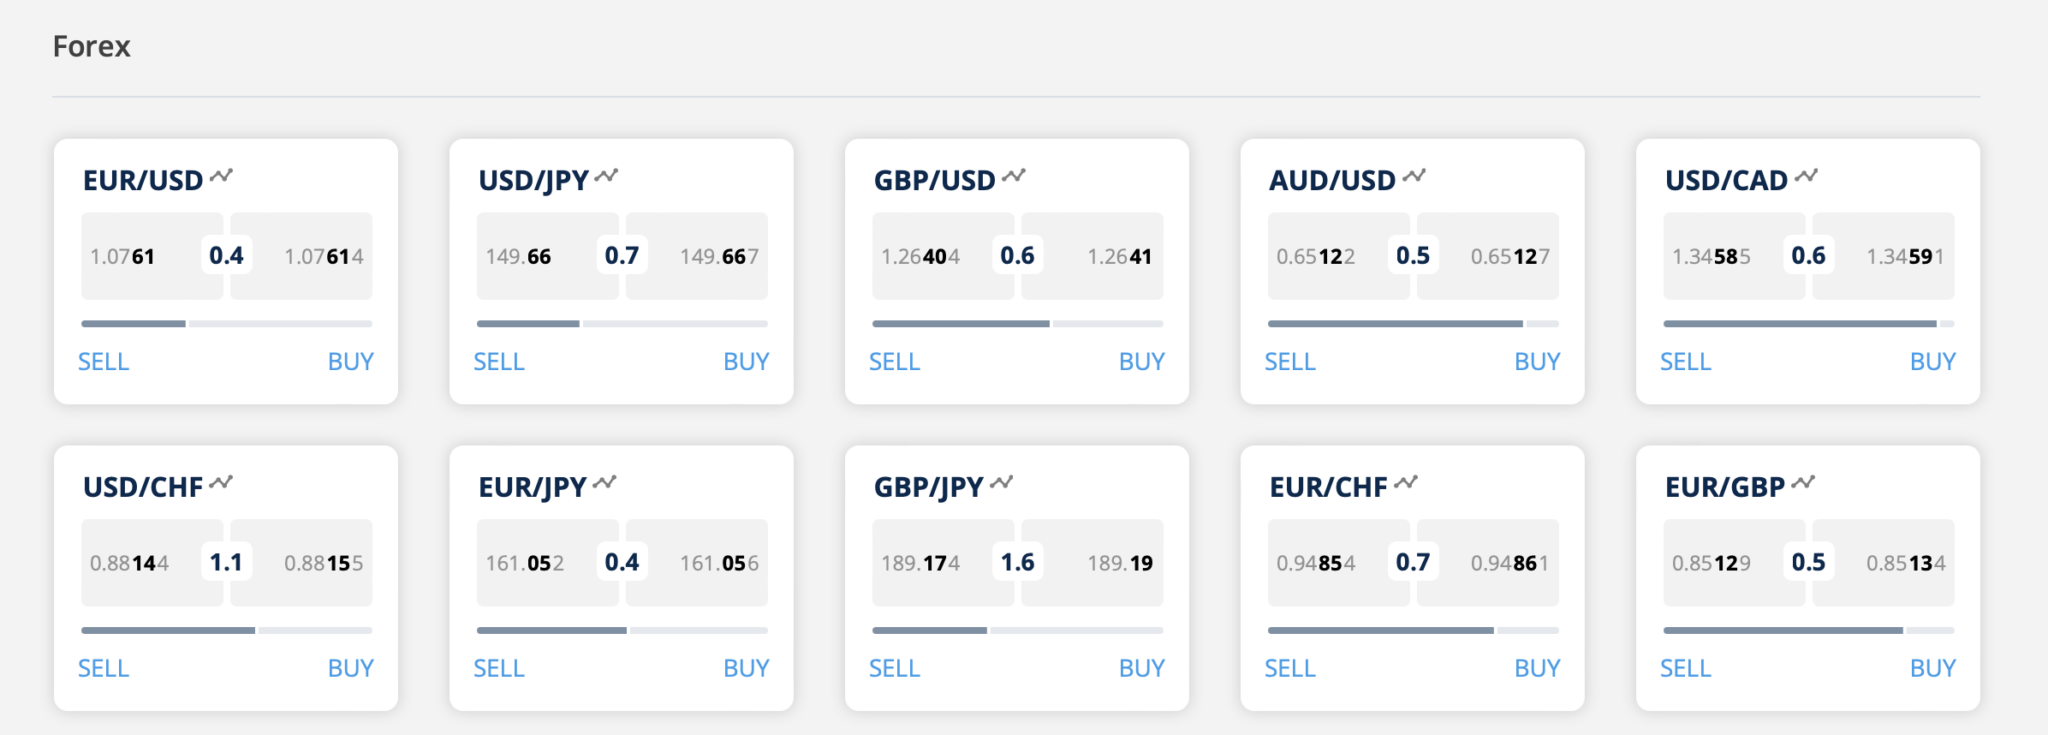 Table of ZuluTrade's FX pairs and spreads for AAAFx clients